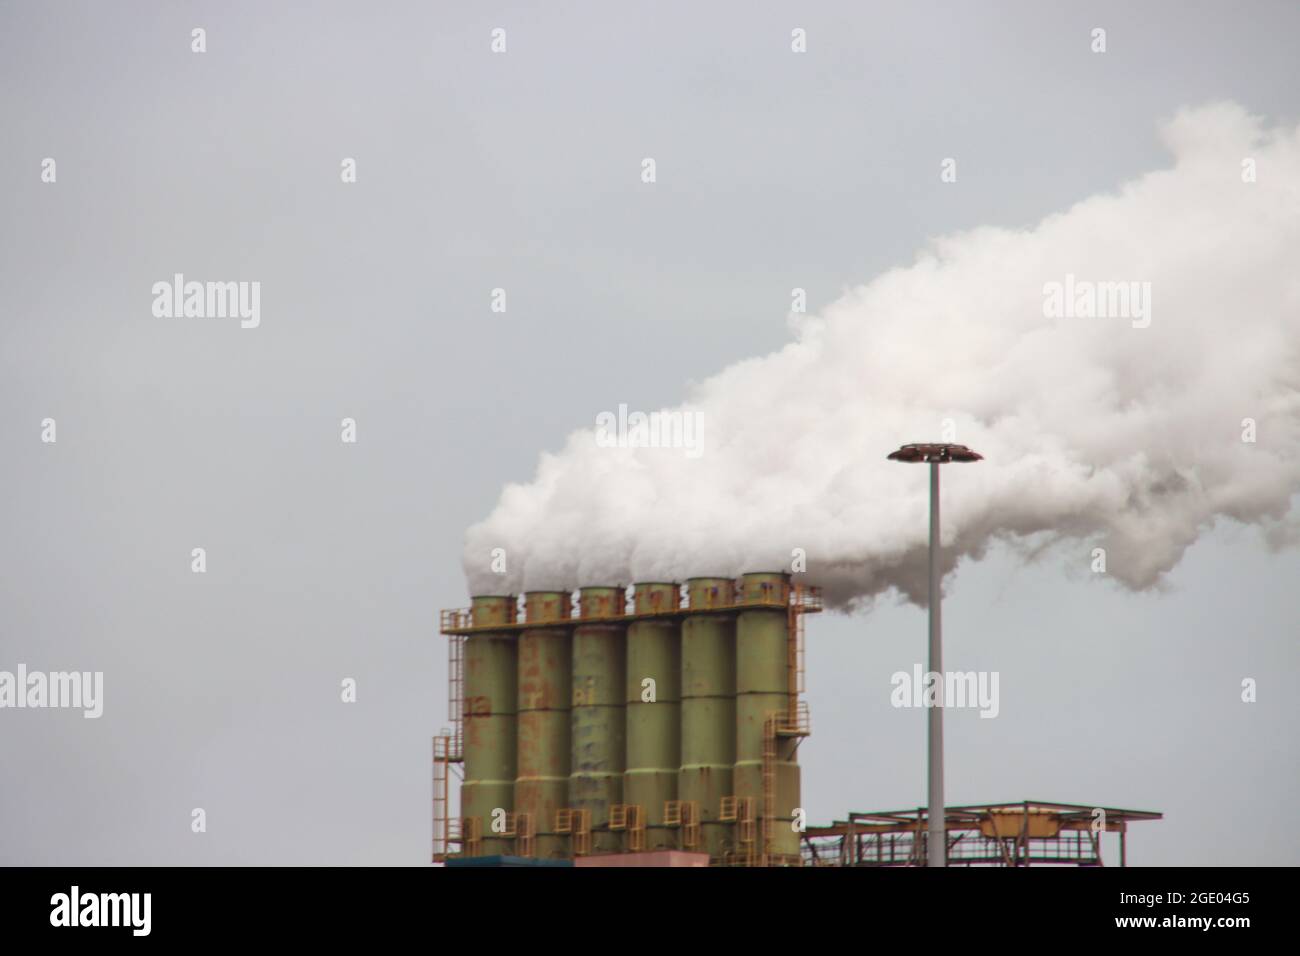 Steam comes out of the Chimneys at Tata steel production plant in IJmuiden the Netherlands Stock Photo